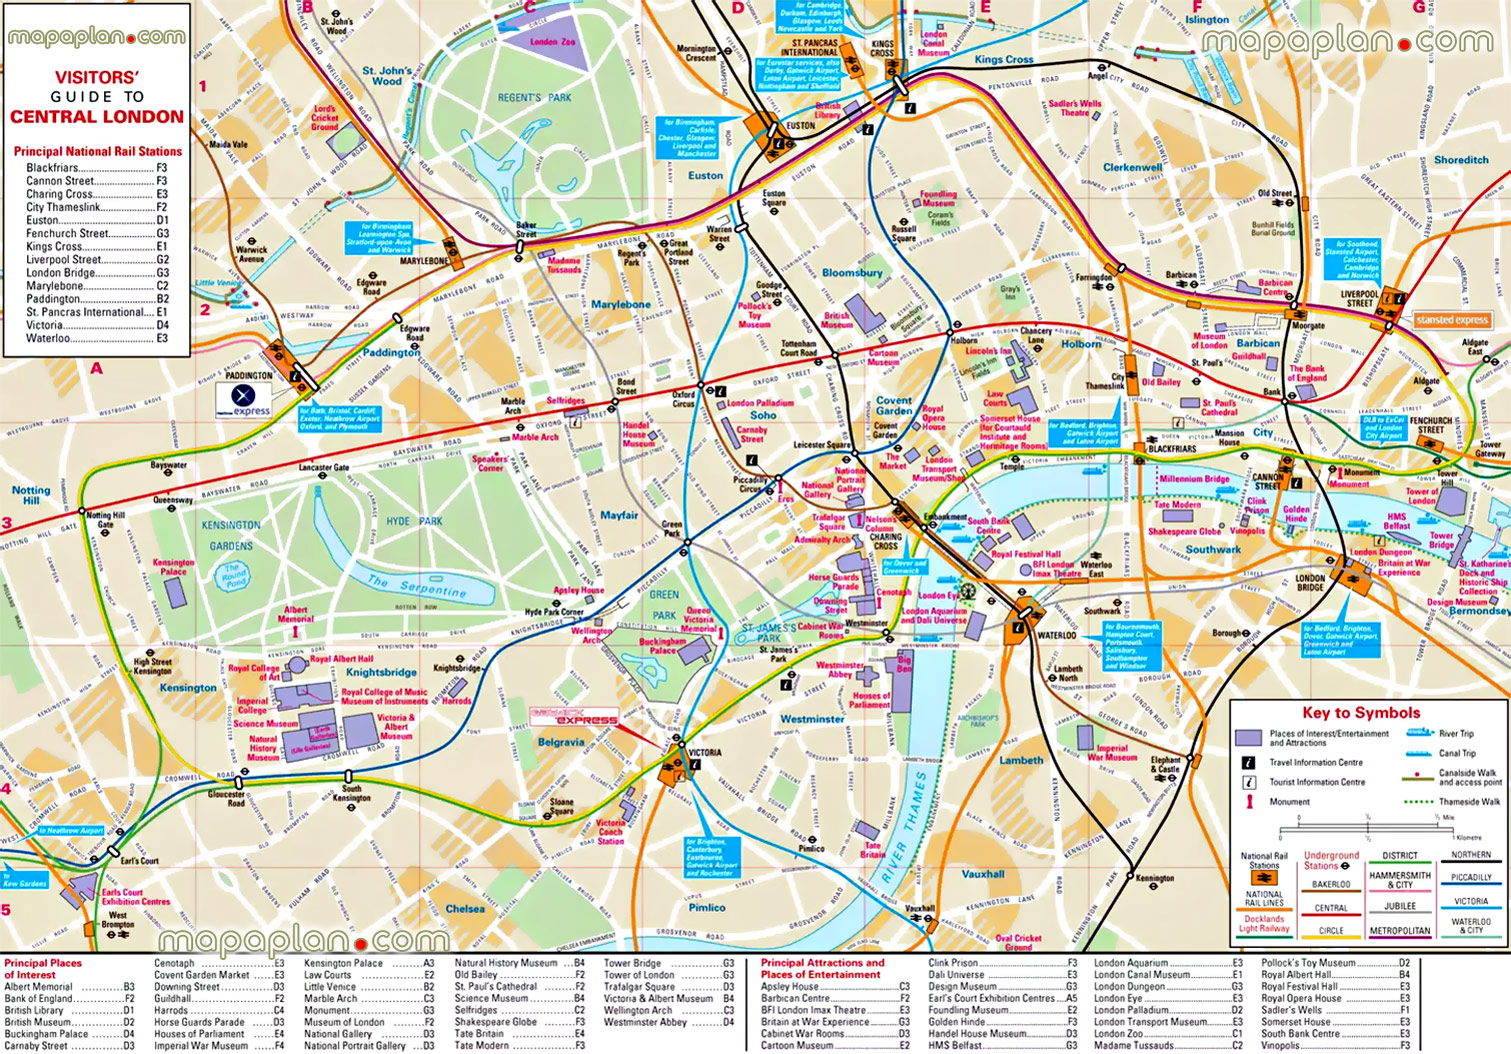 tourist tube stations overlay guide list attractions places visit official tourist visitors information centre at st pauls cathedrals London Top tourist attractions map